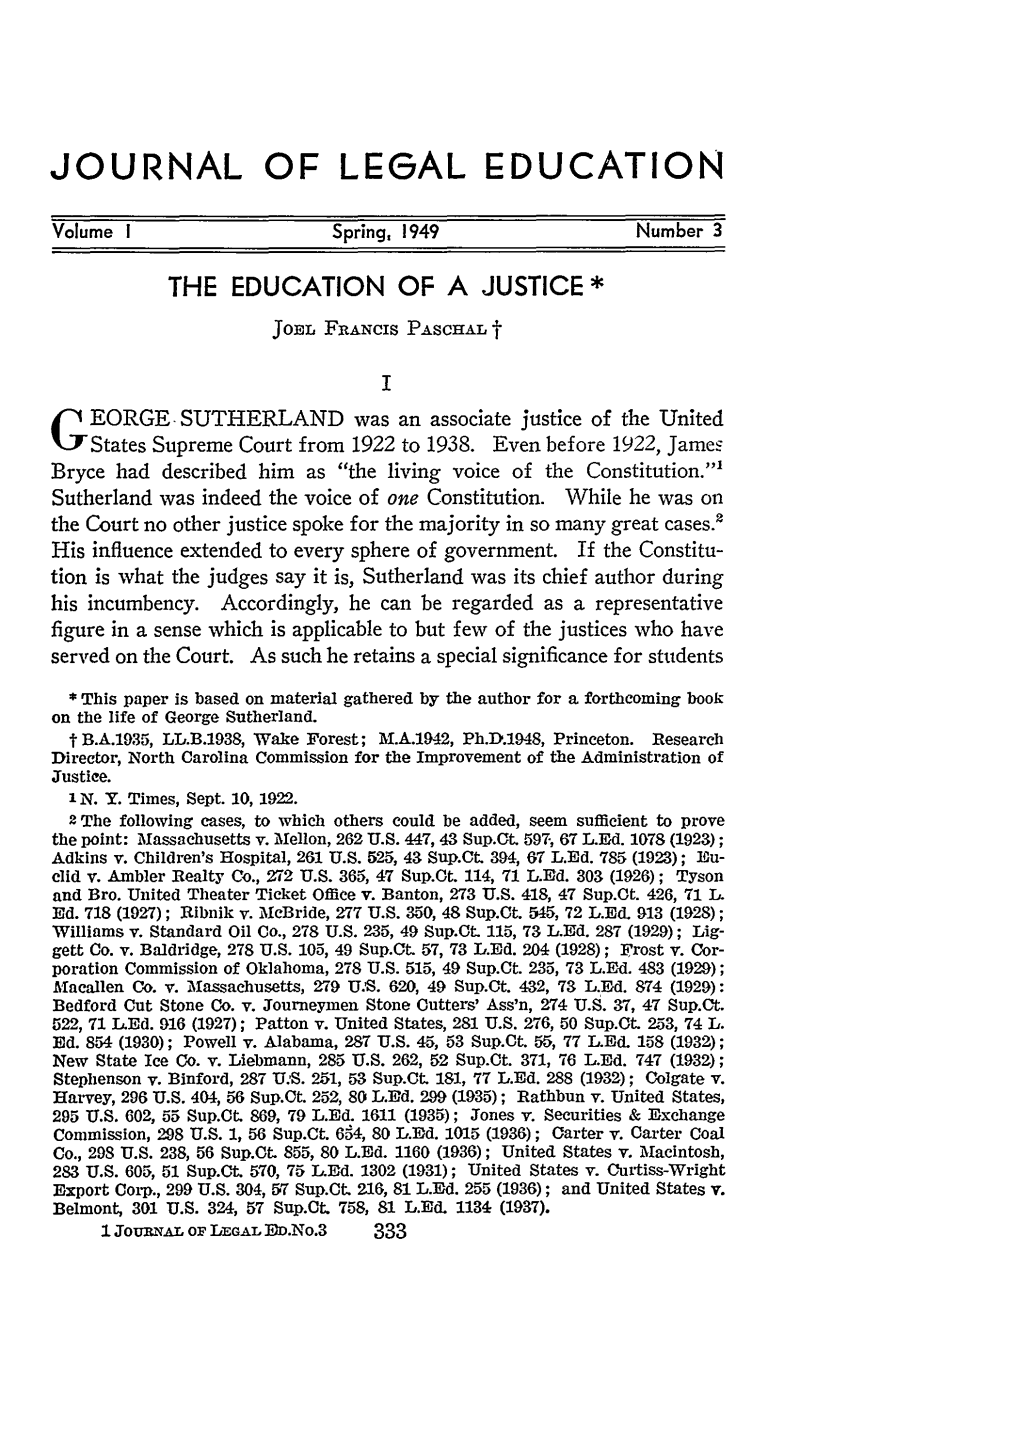 Education of a Justice